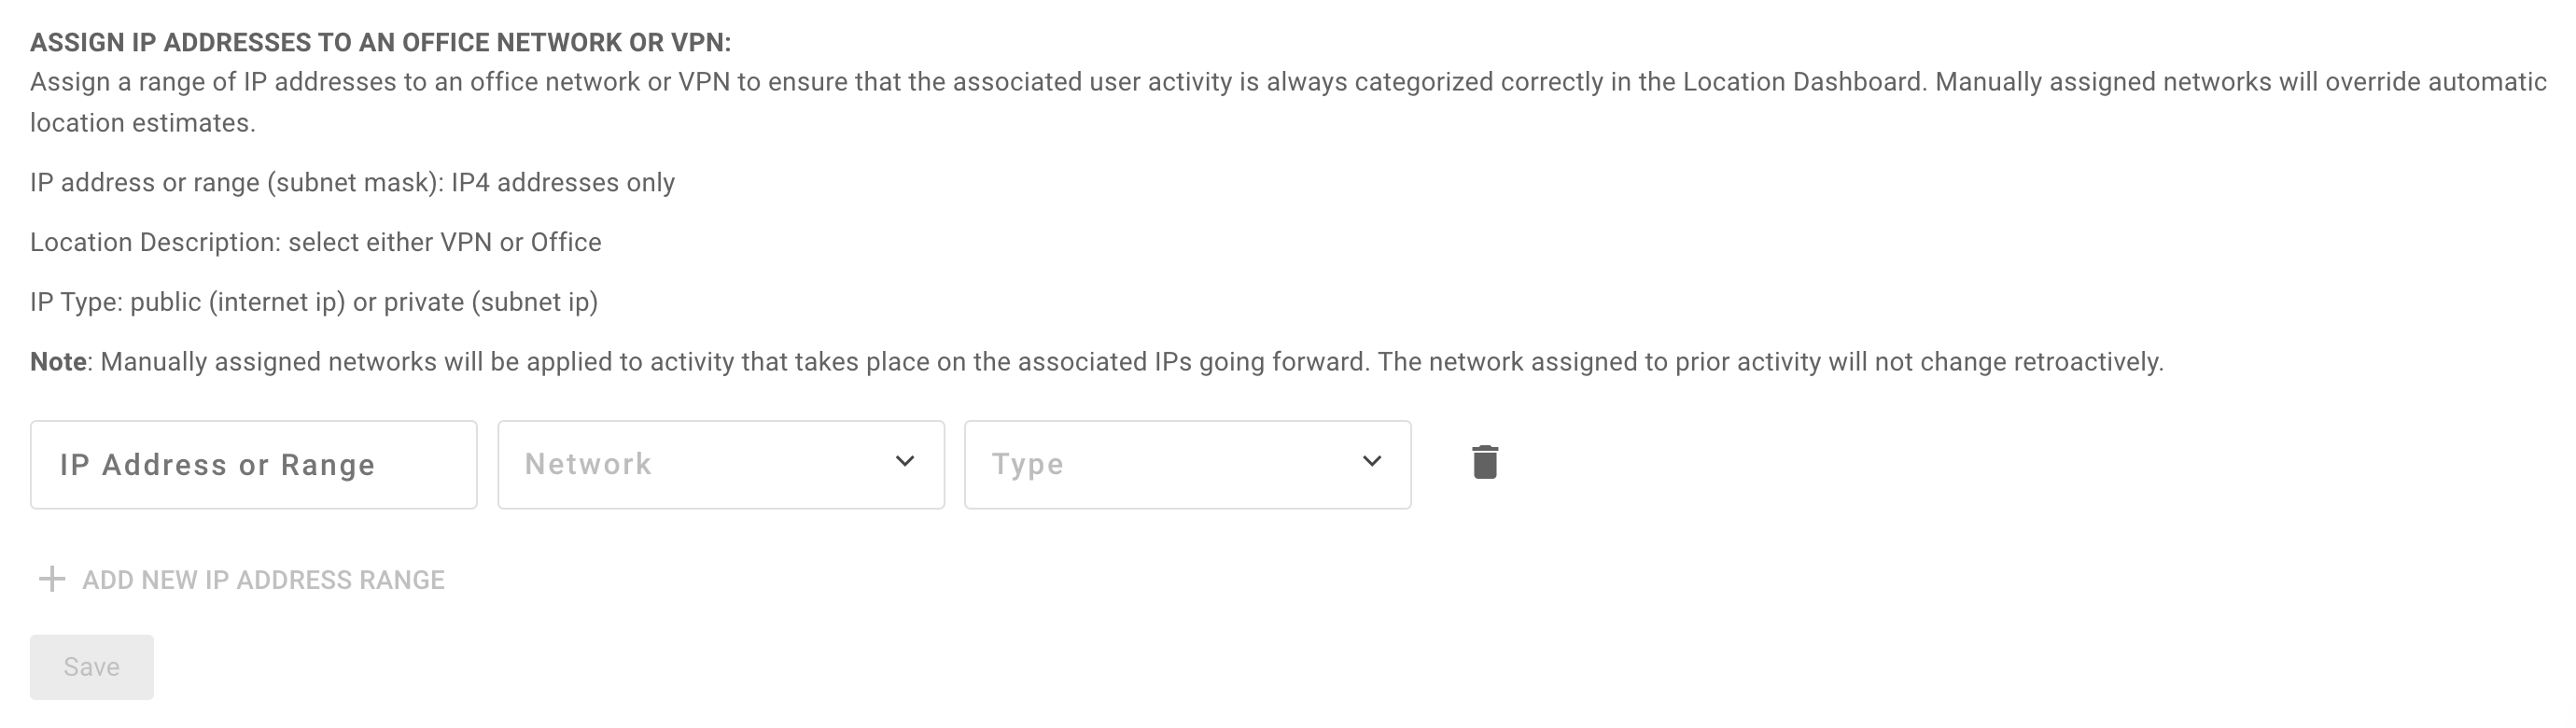 Assign_IP_Addresses_to_an_Office_Network_or_VPN.png